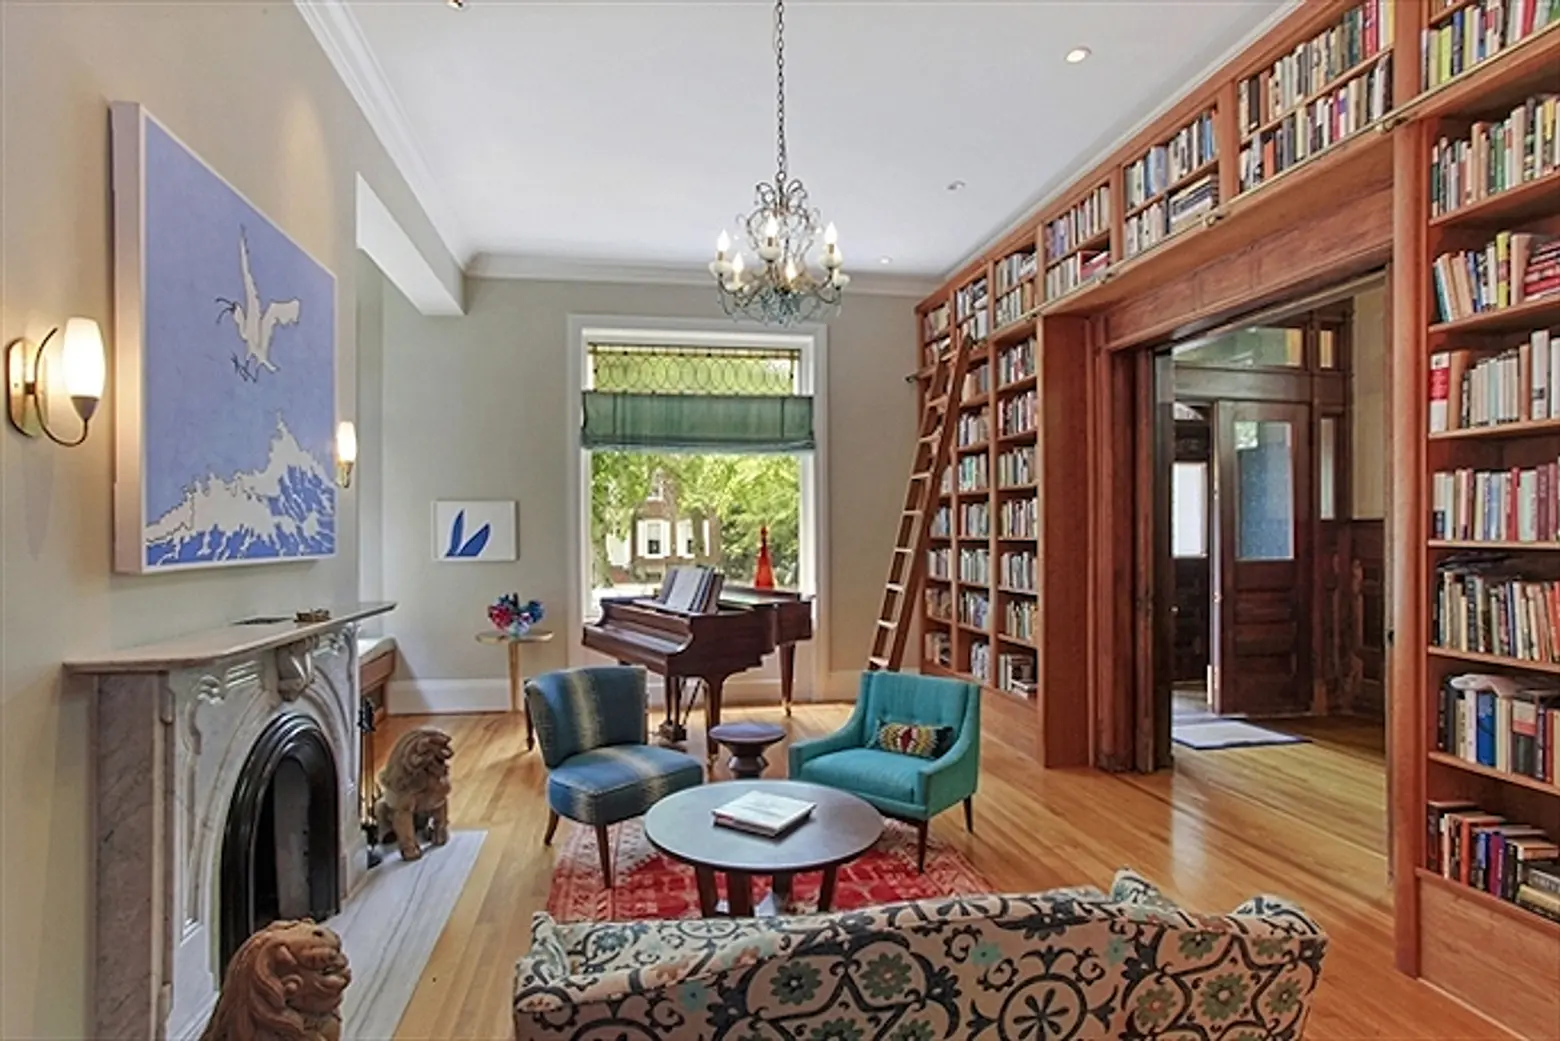 If These Walls Could Talk: The Former Home of Two Brooklyn Mayors Goes on the Market